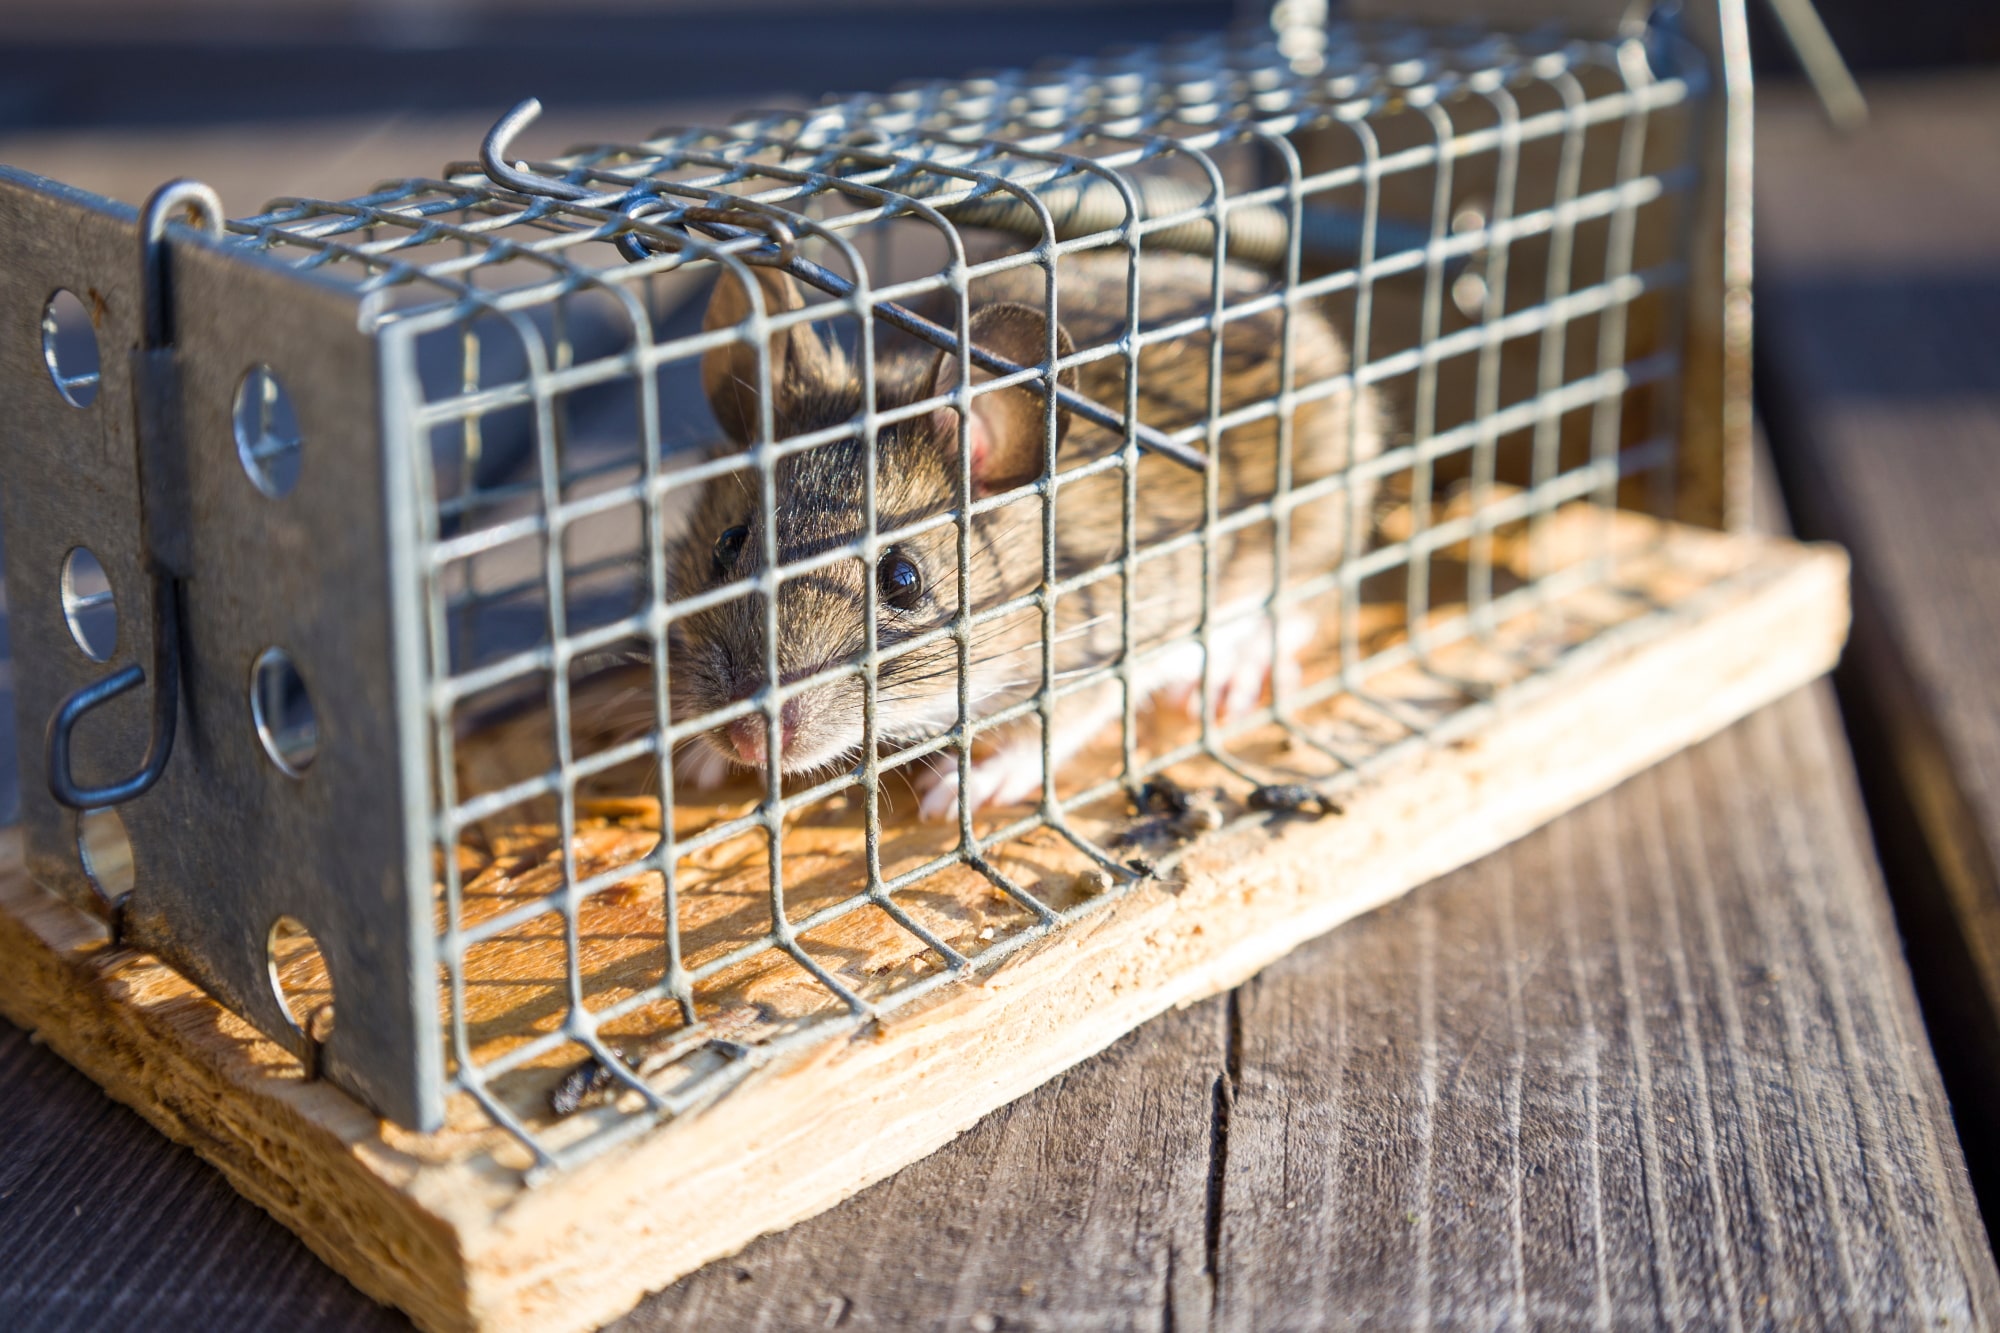 Eliminate Pest Control Rat and Mice Control Adelaide Rat in Cage